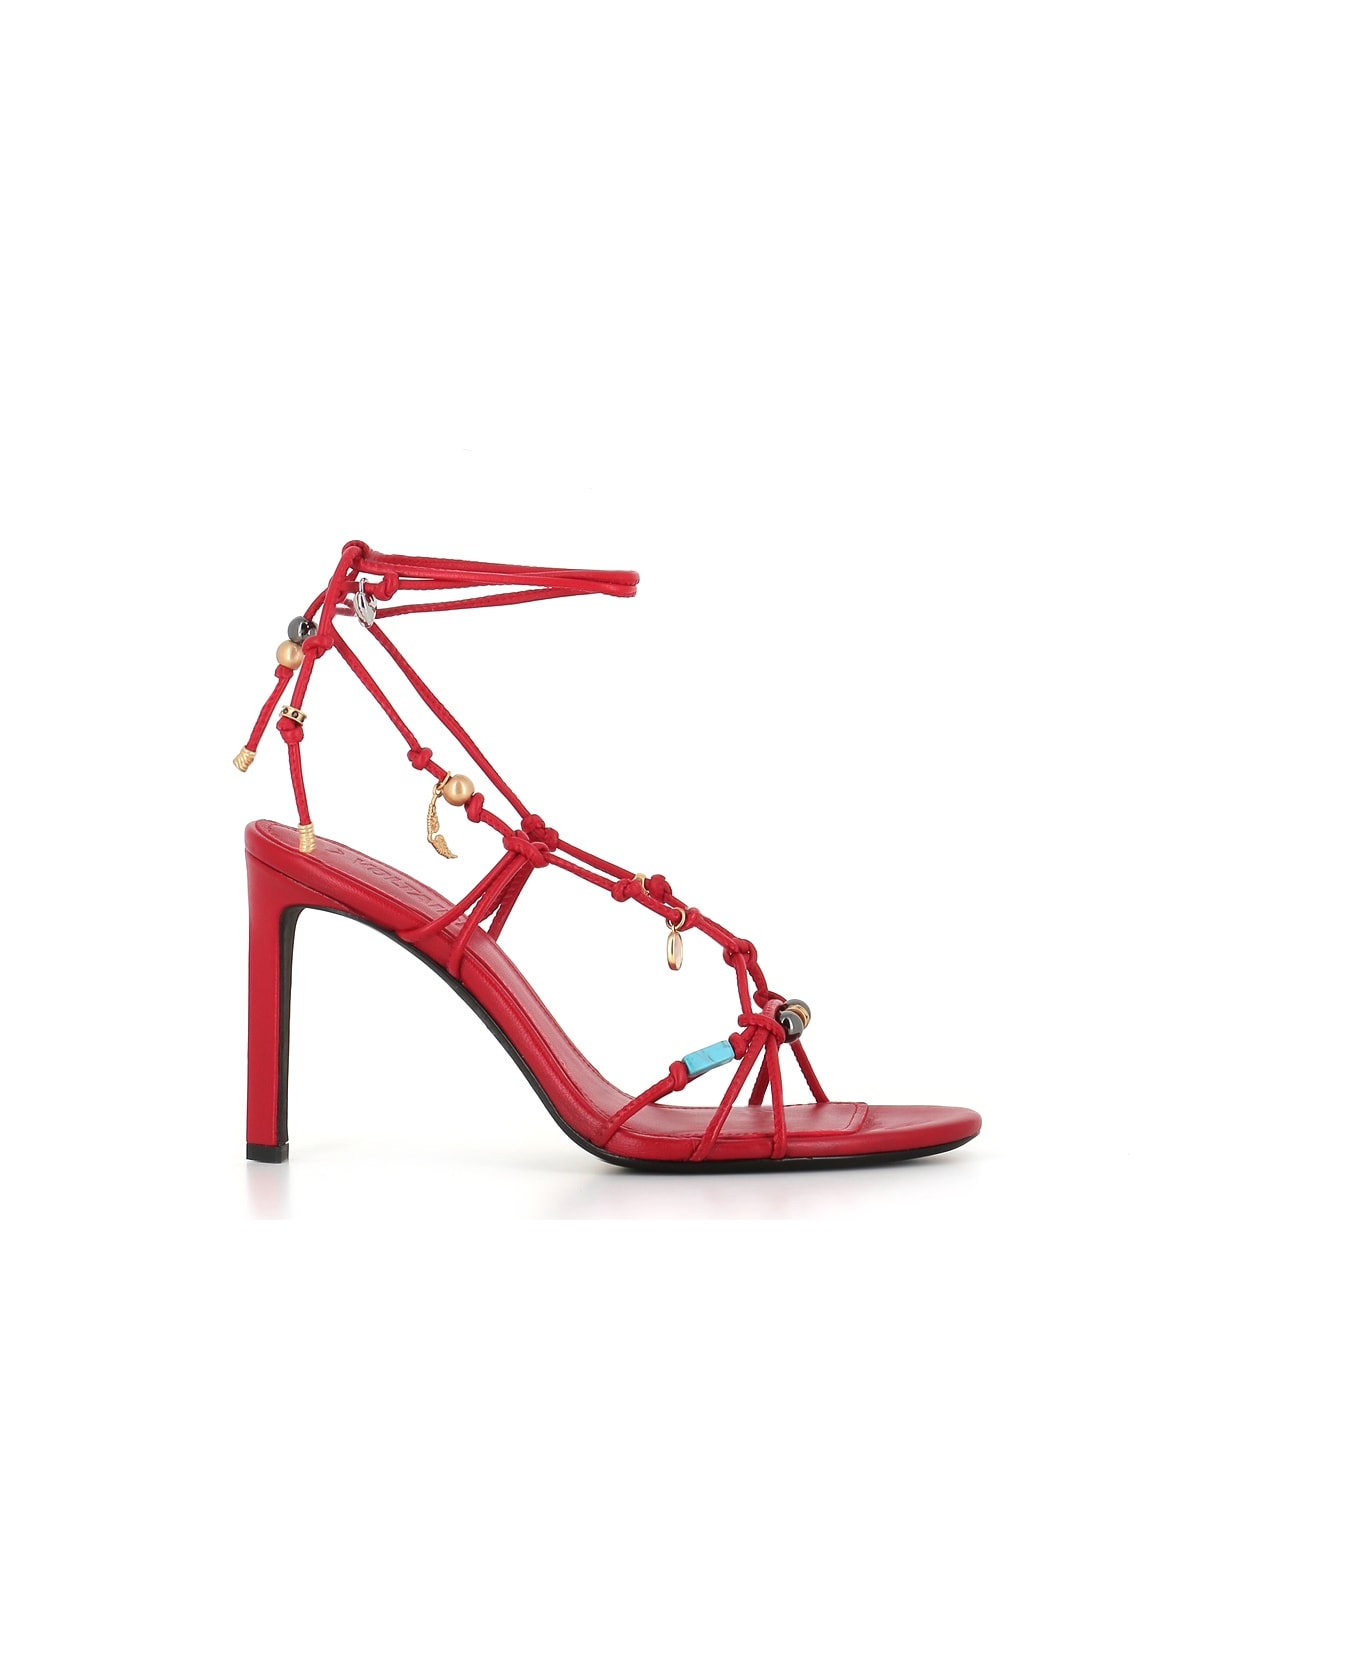 Zadig & Voltaire Sandal Alana - Red サンダル